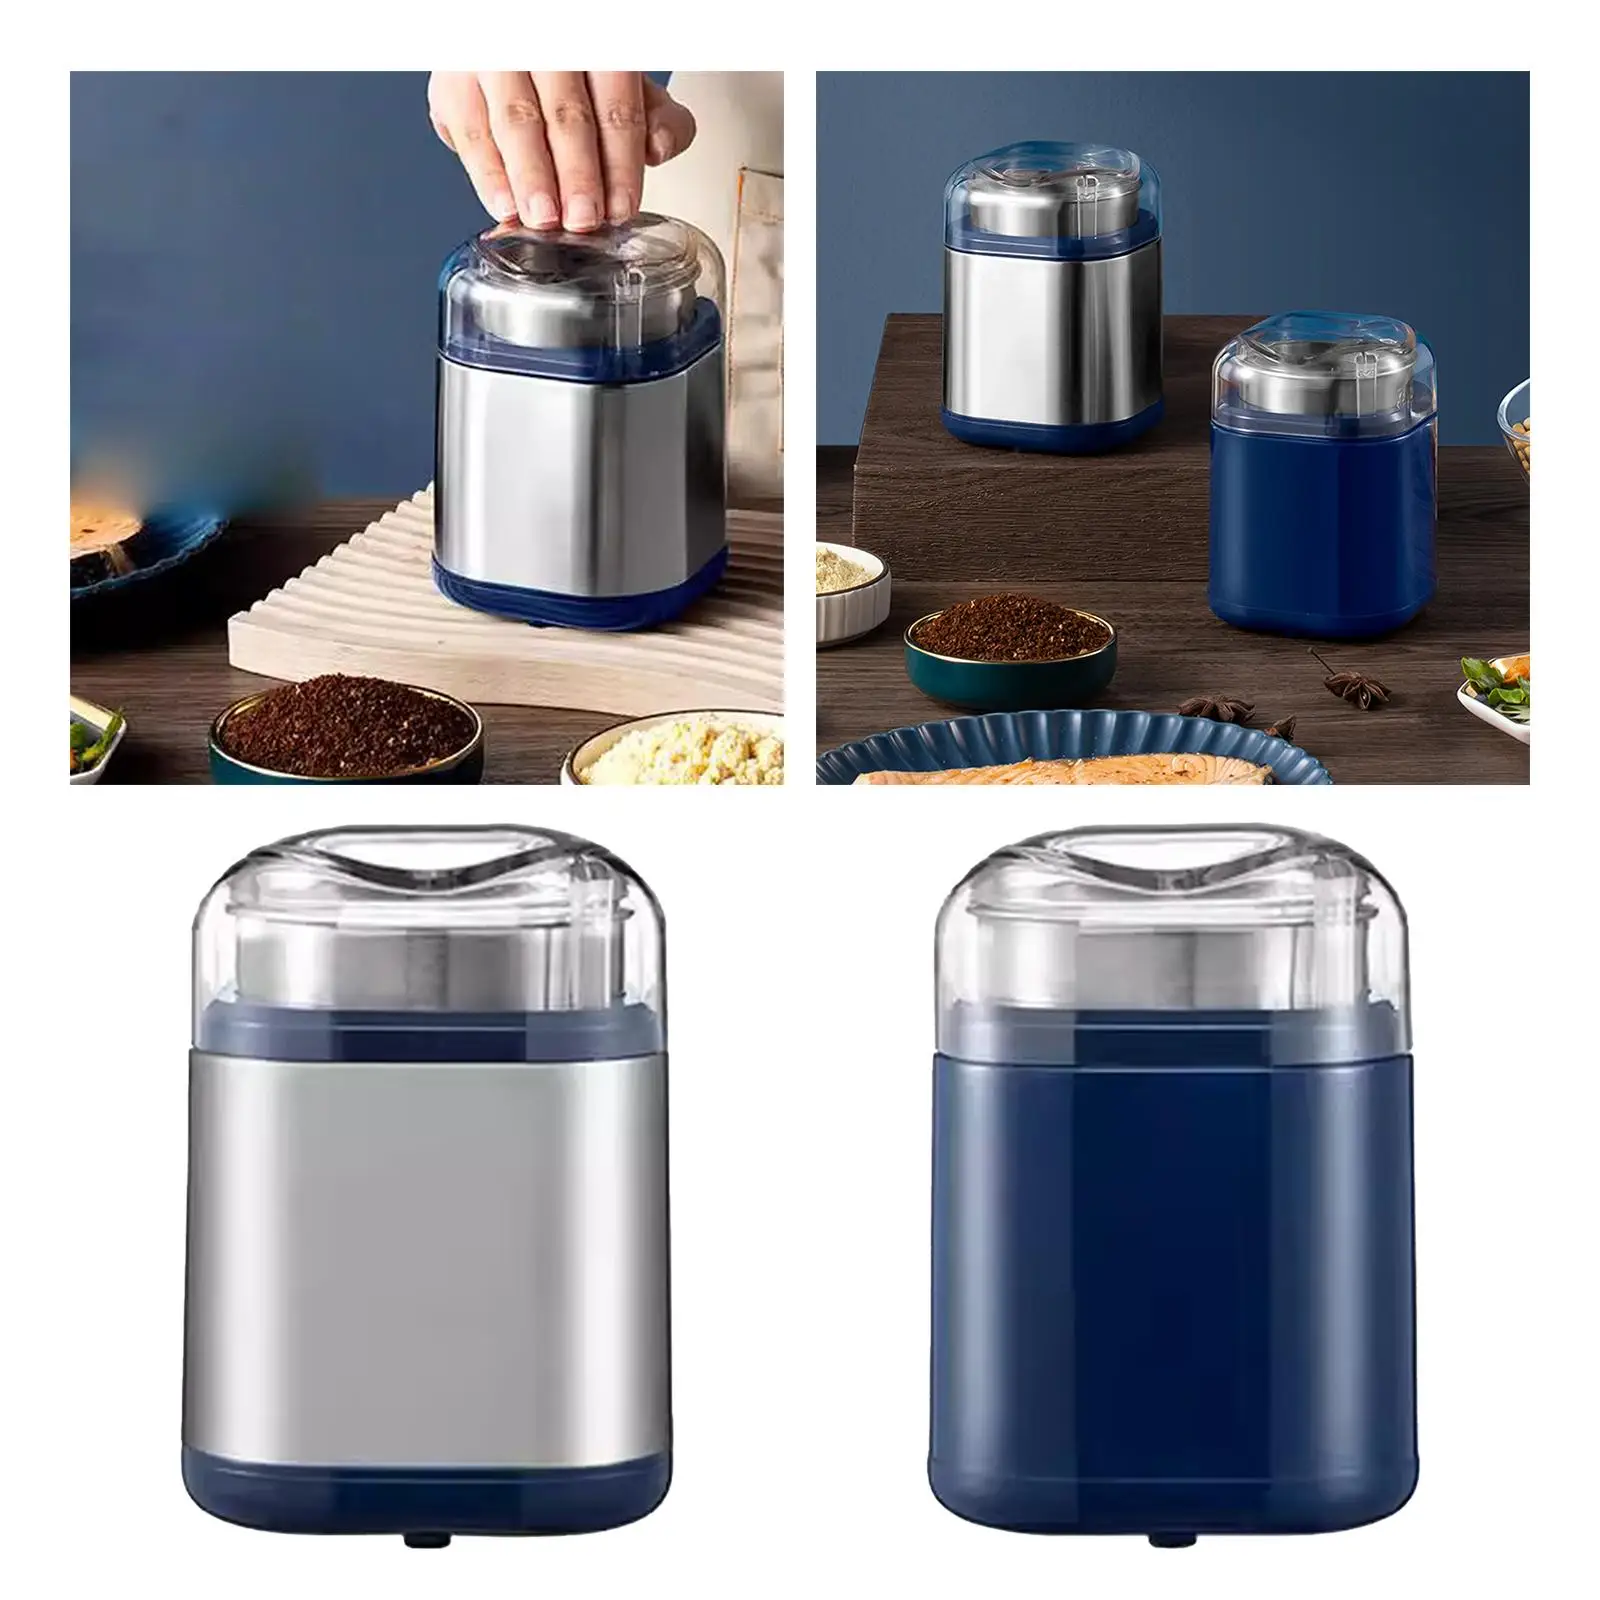 Electric Spice and Coffee Grinder Dried Spices Multifunction Fast Speed Blade Food Processer for Coffee Beans Grains Nuts Spices